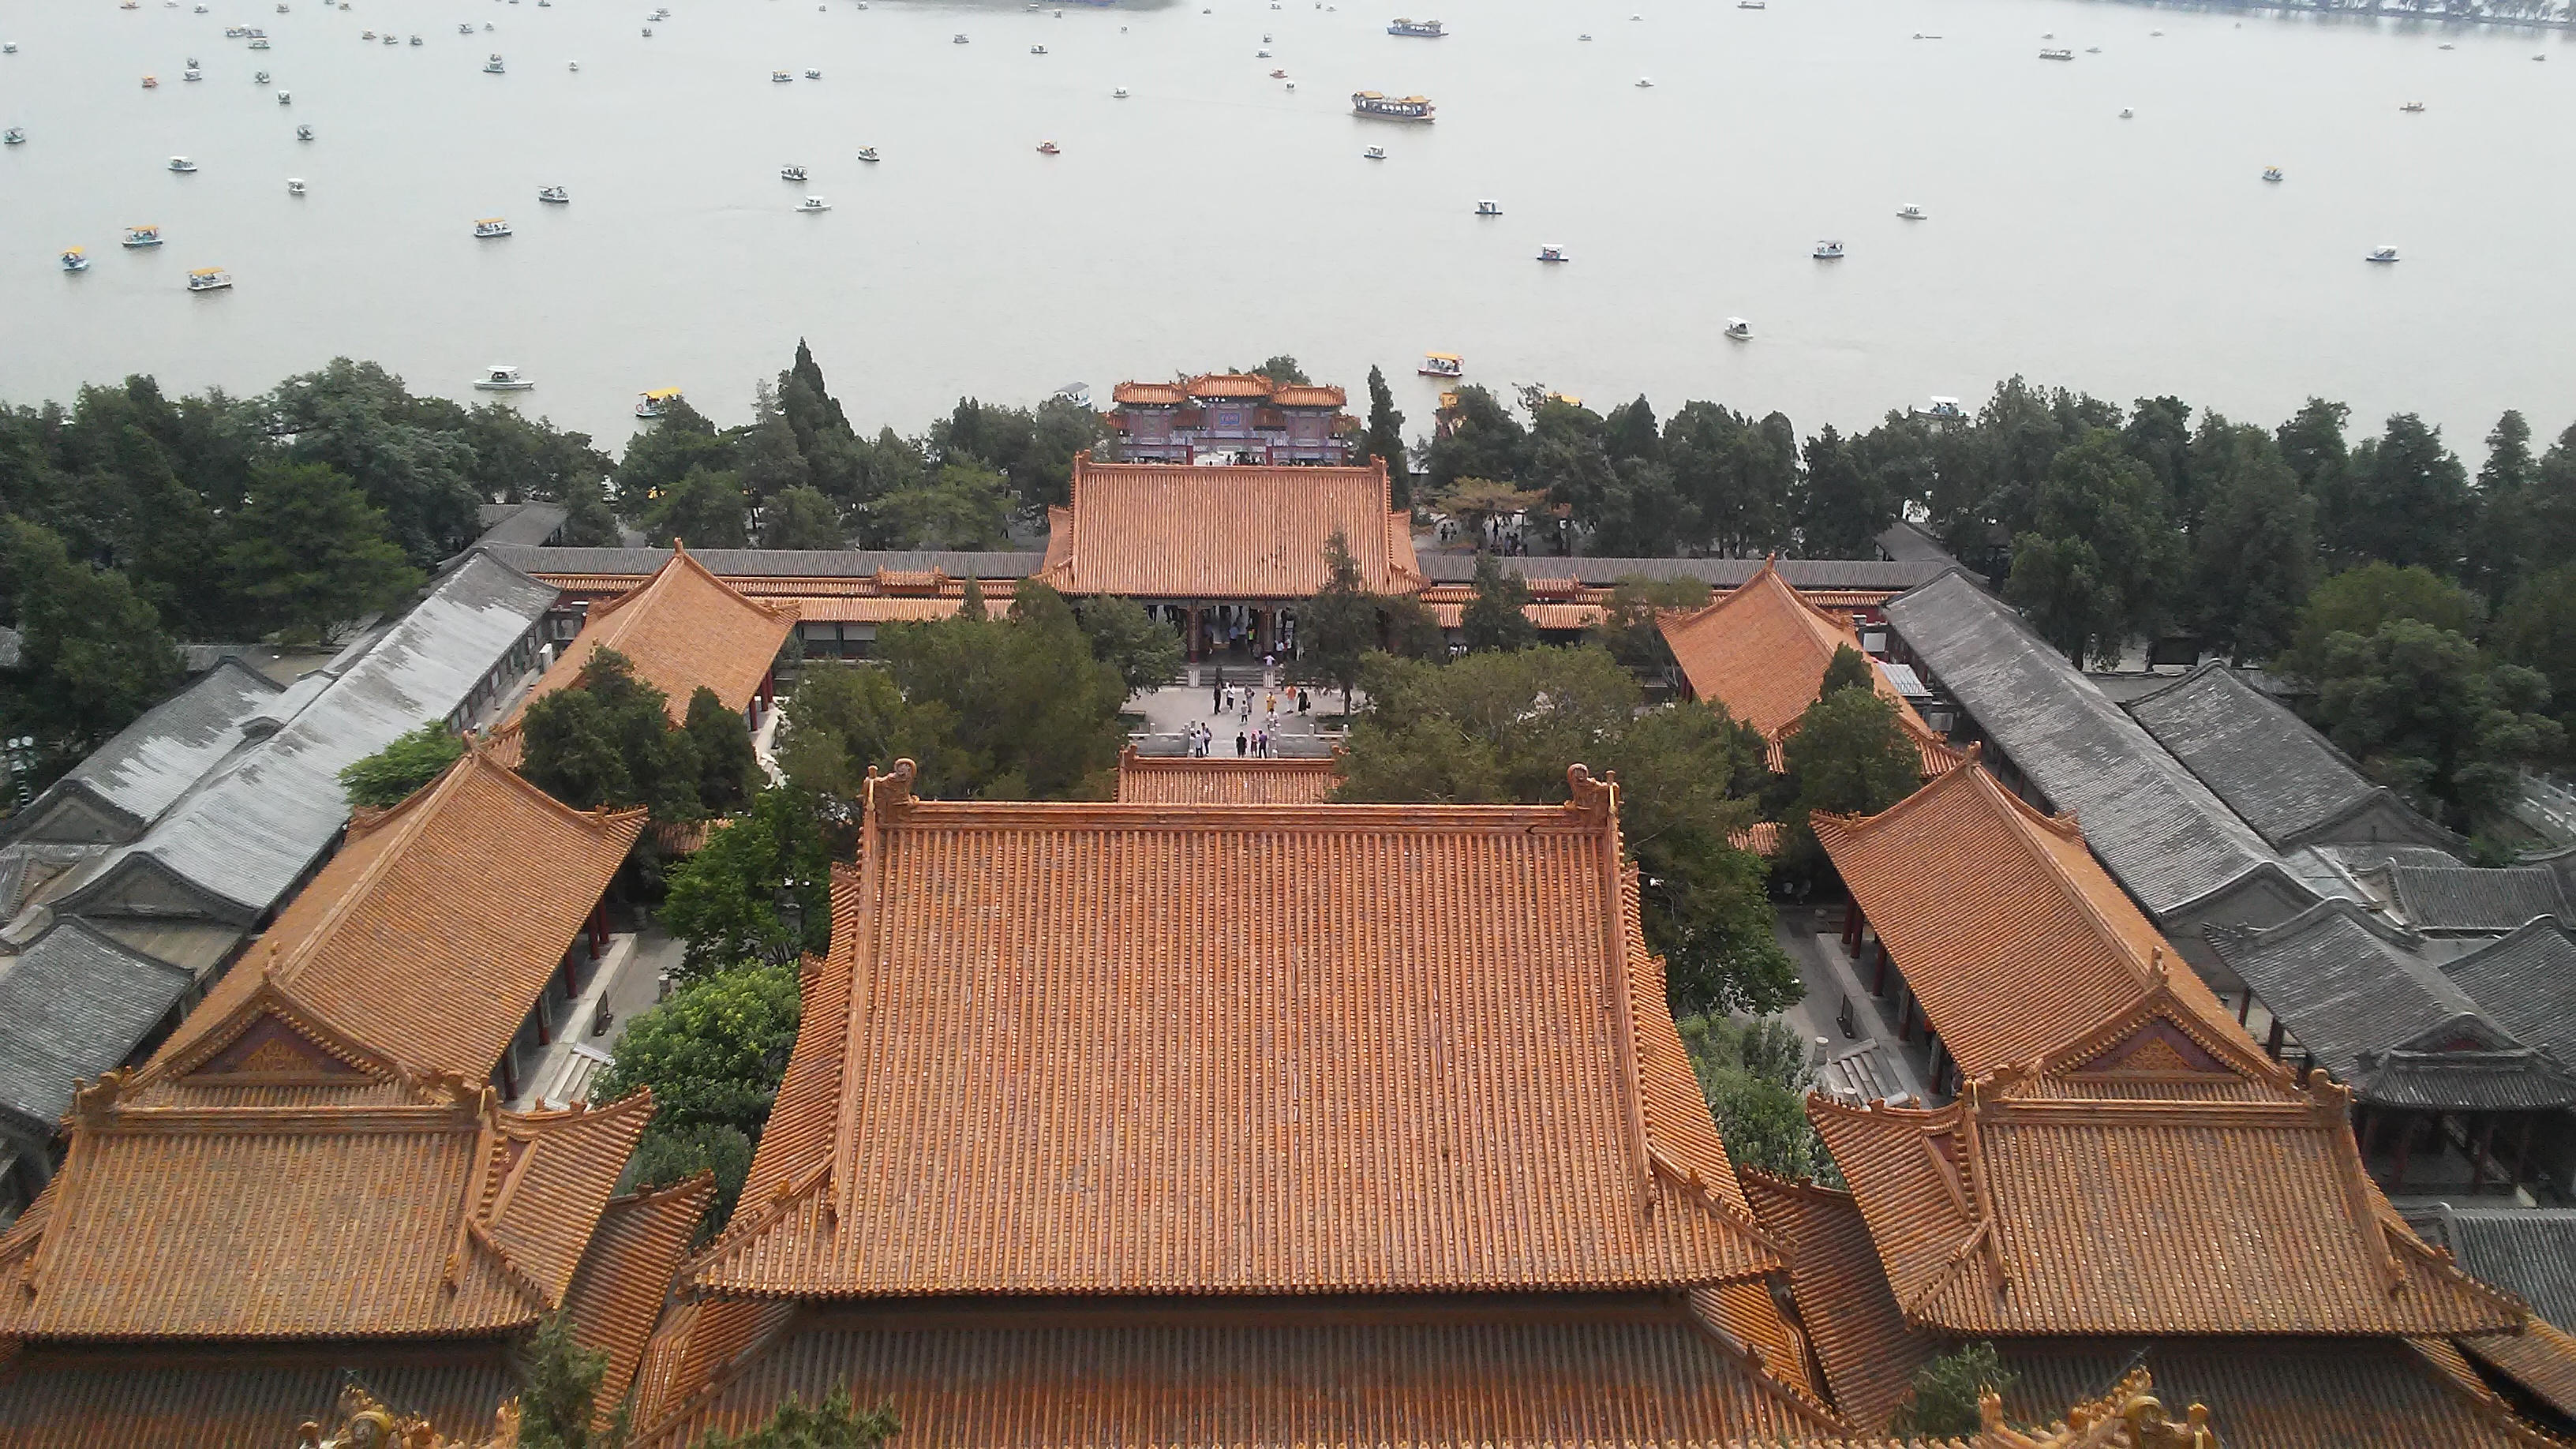 The view from the top of the Summer Palace